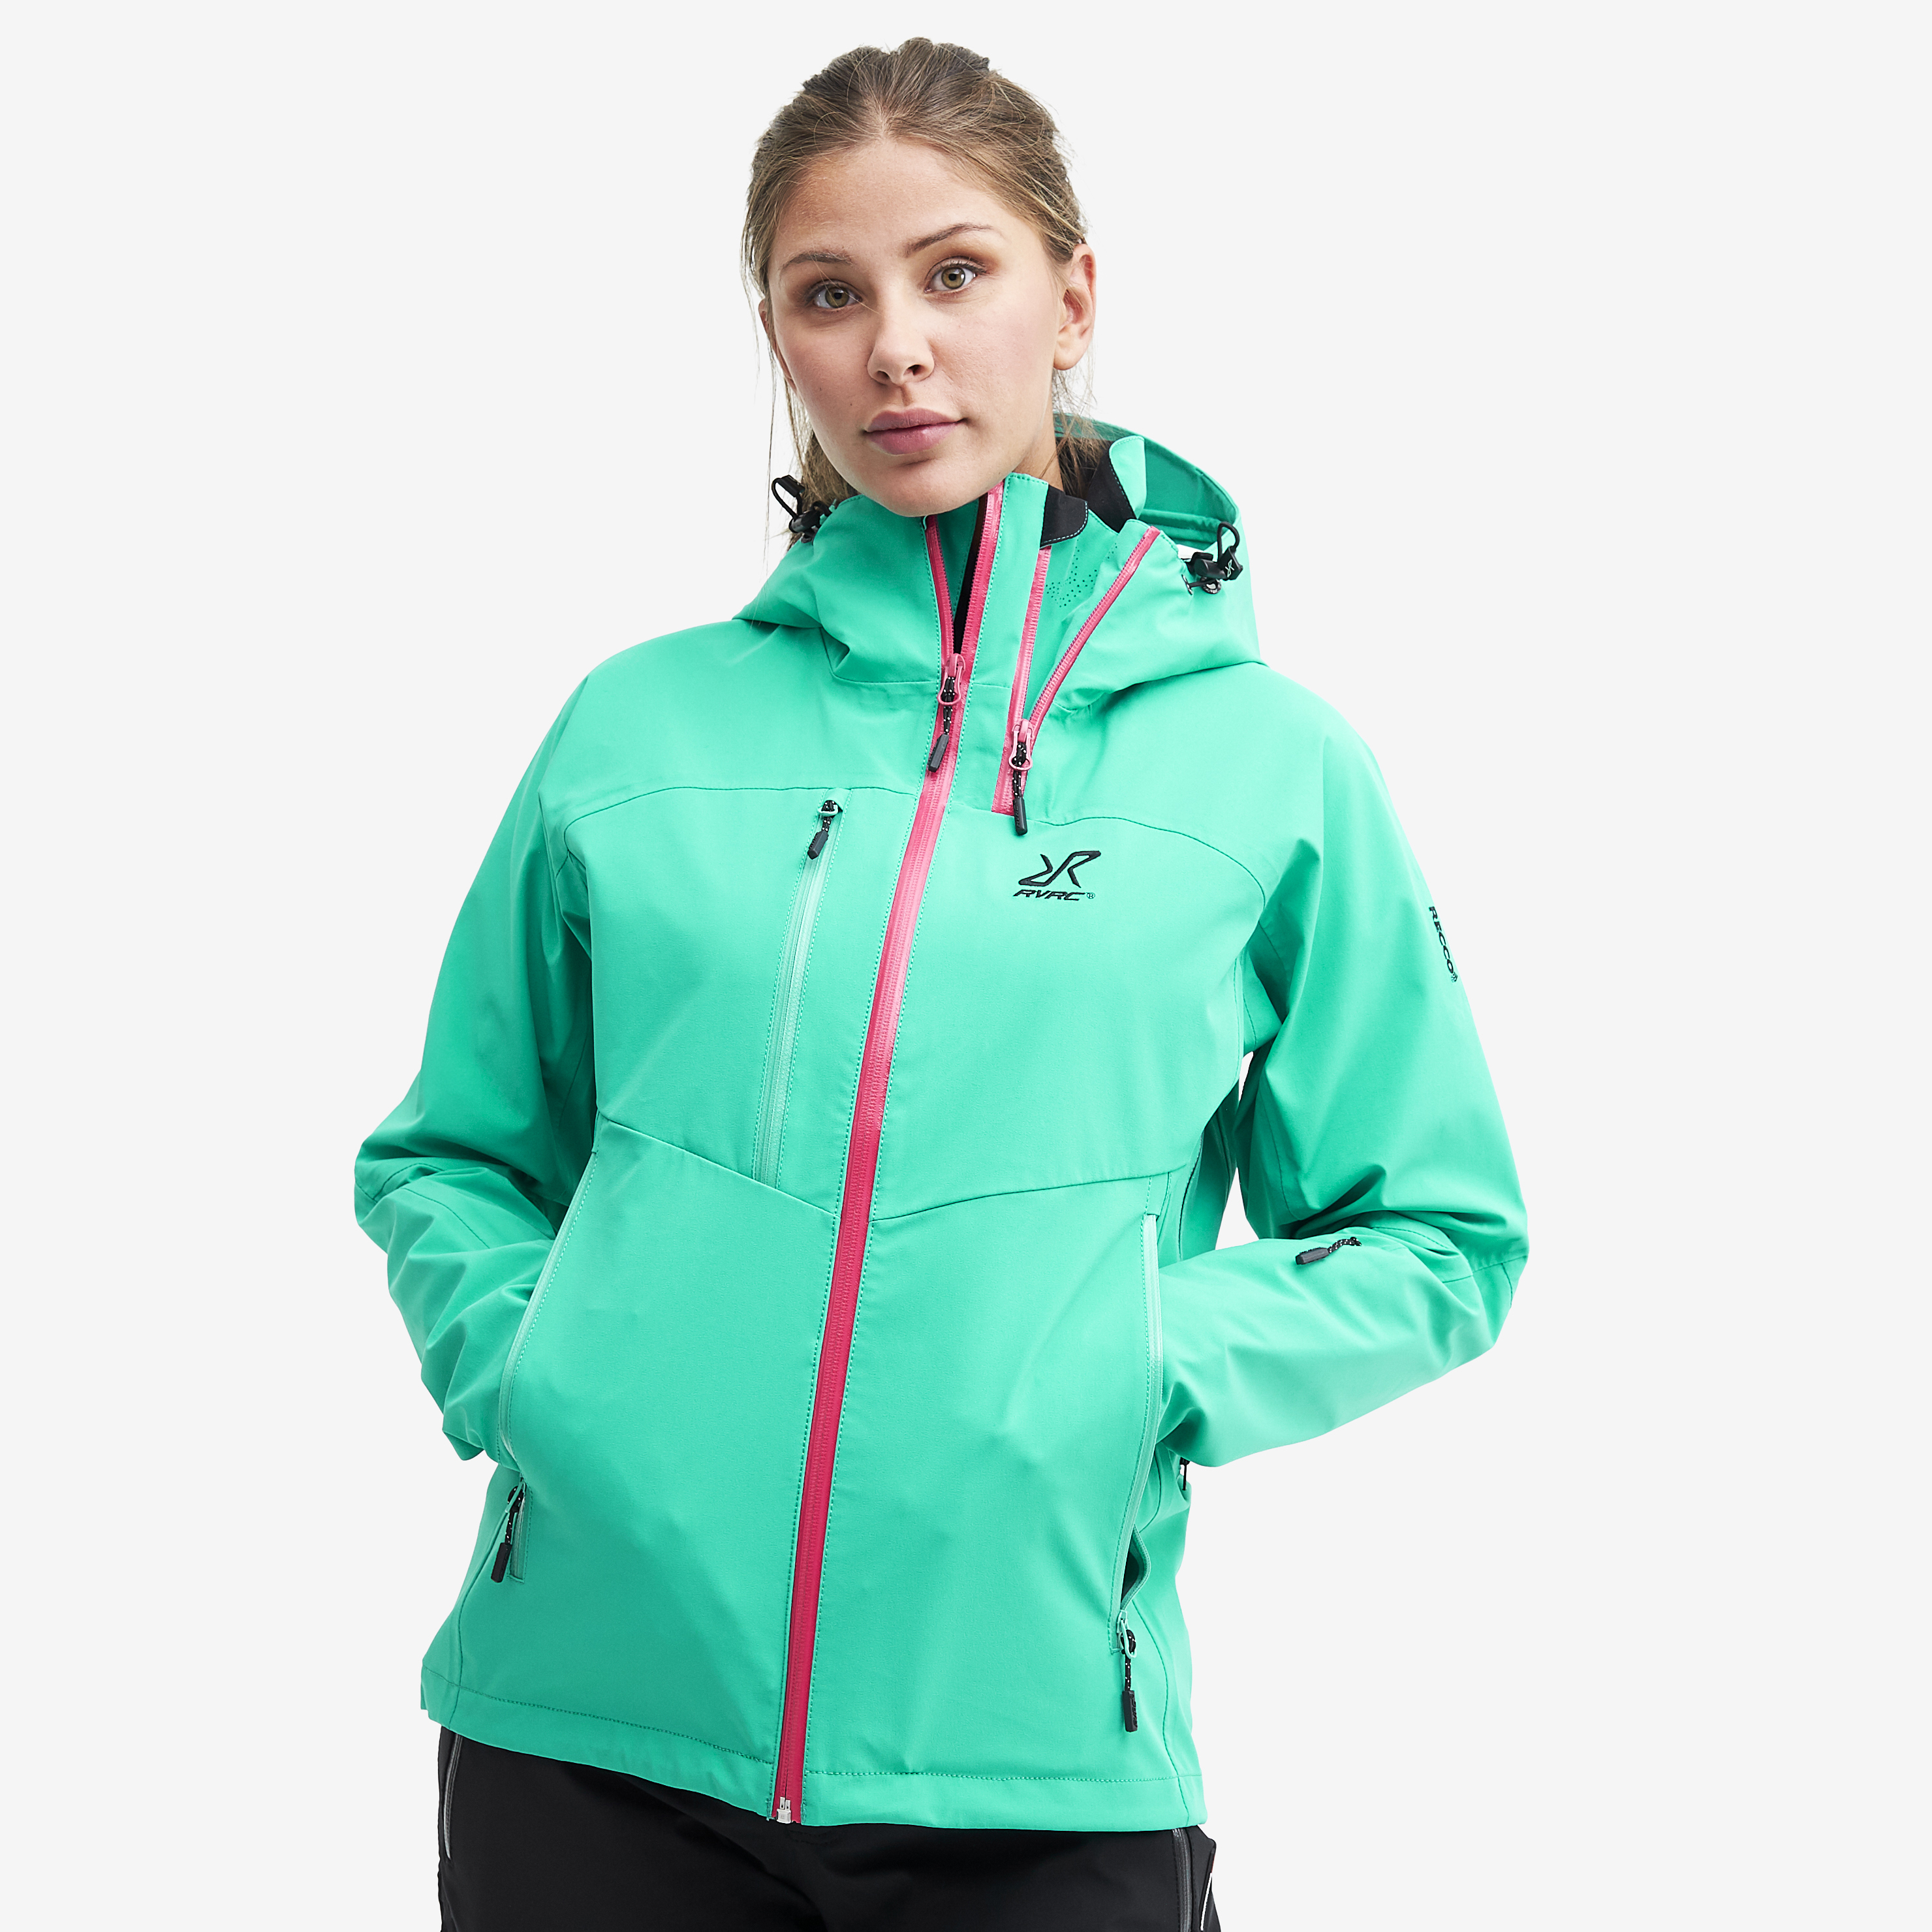 Cyclone Rescue Jacket 2.0 Spectra Green Dame